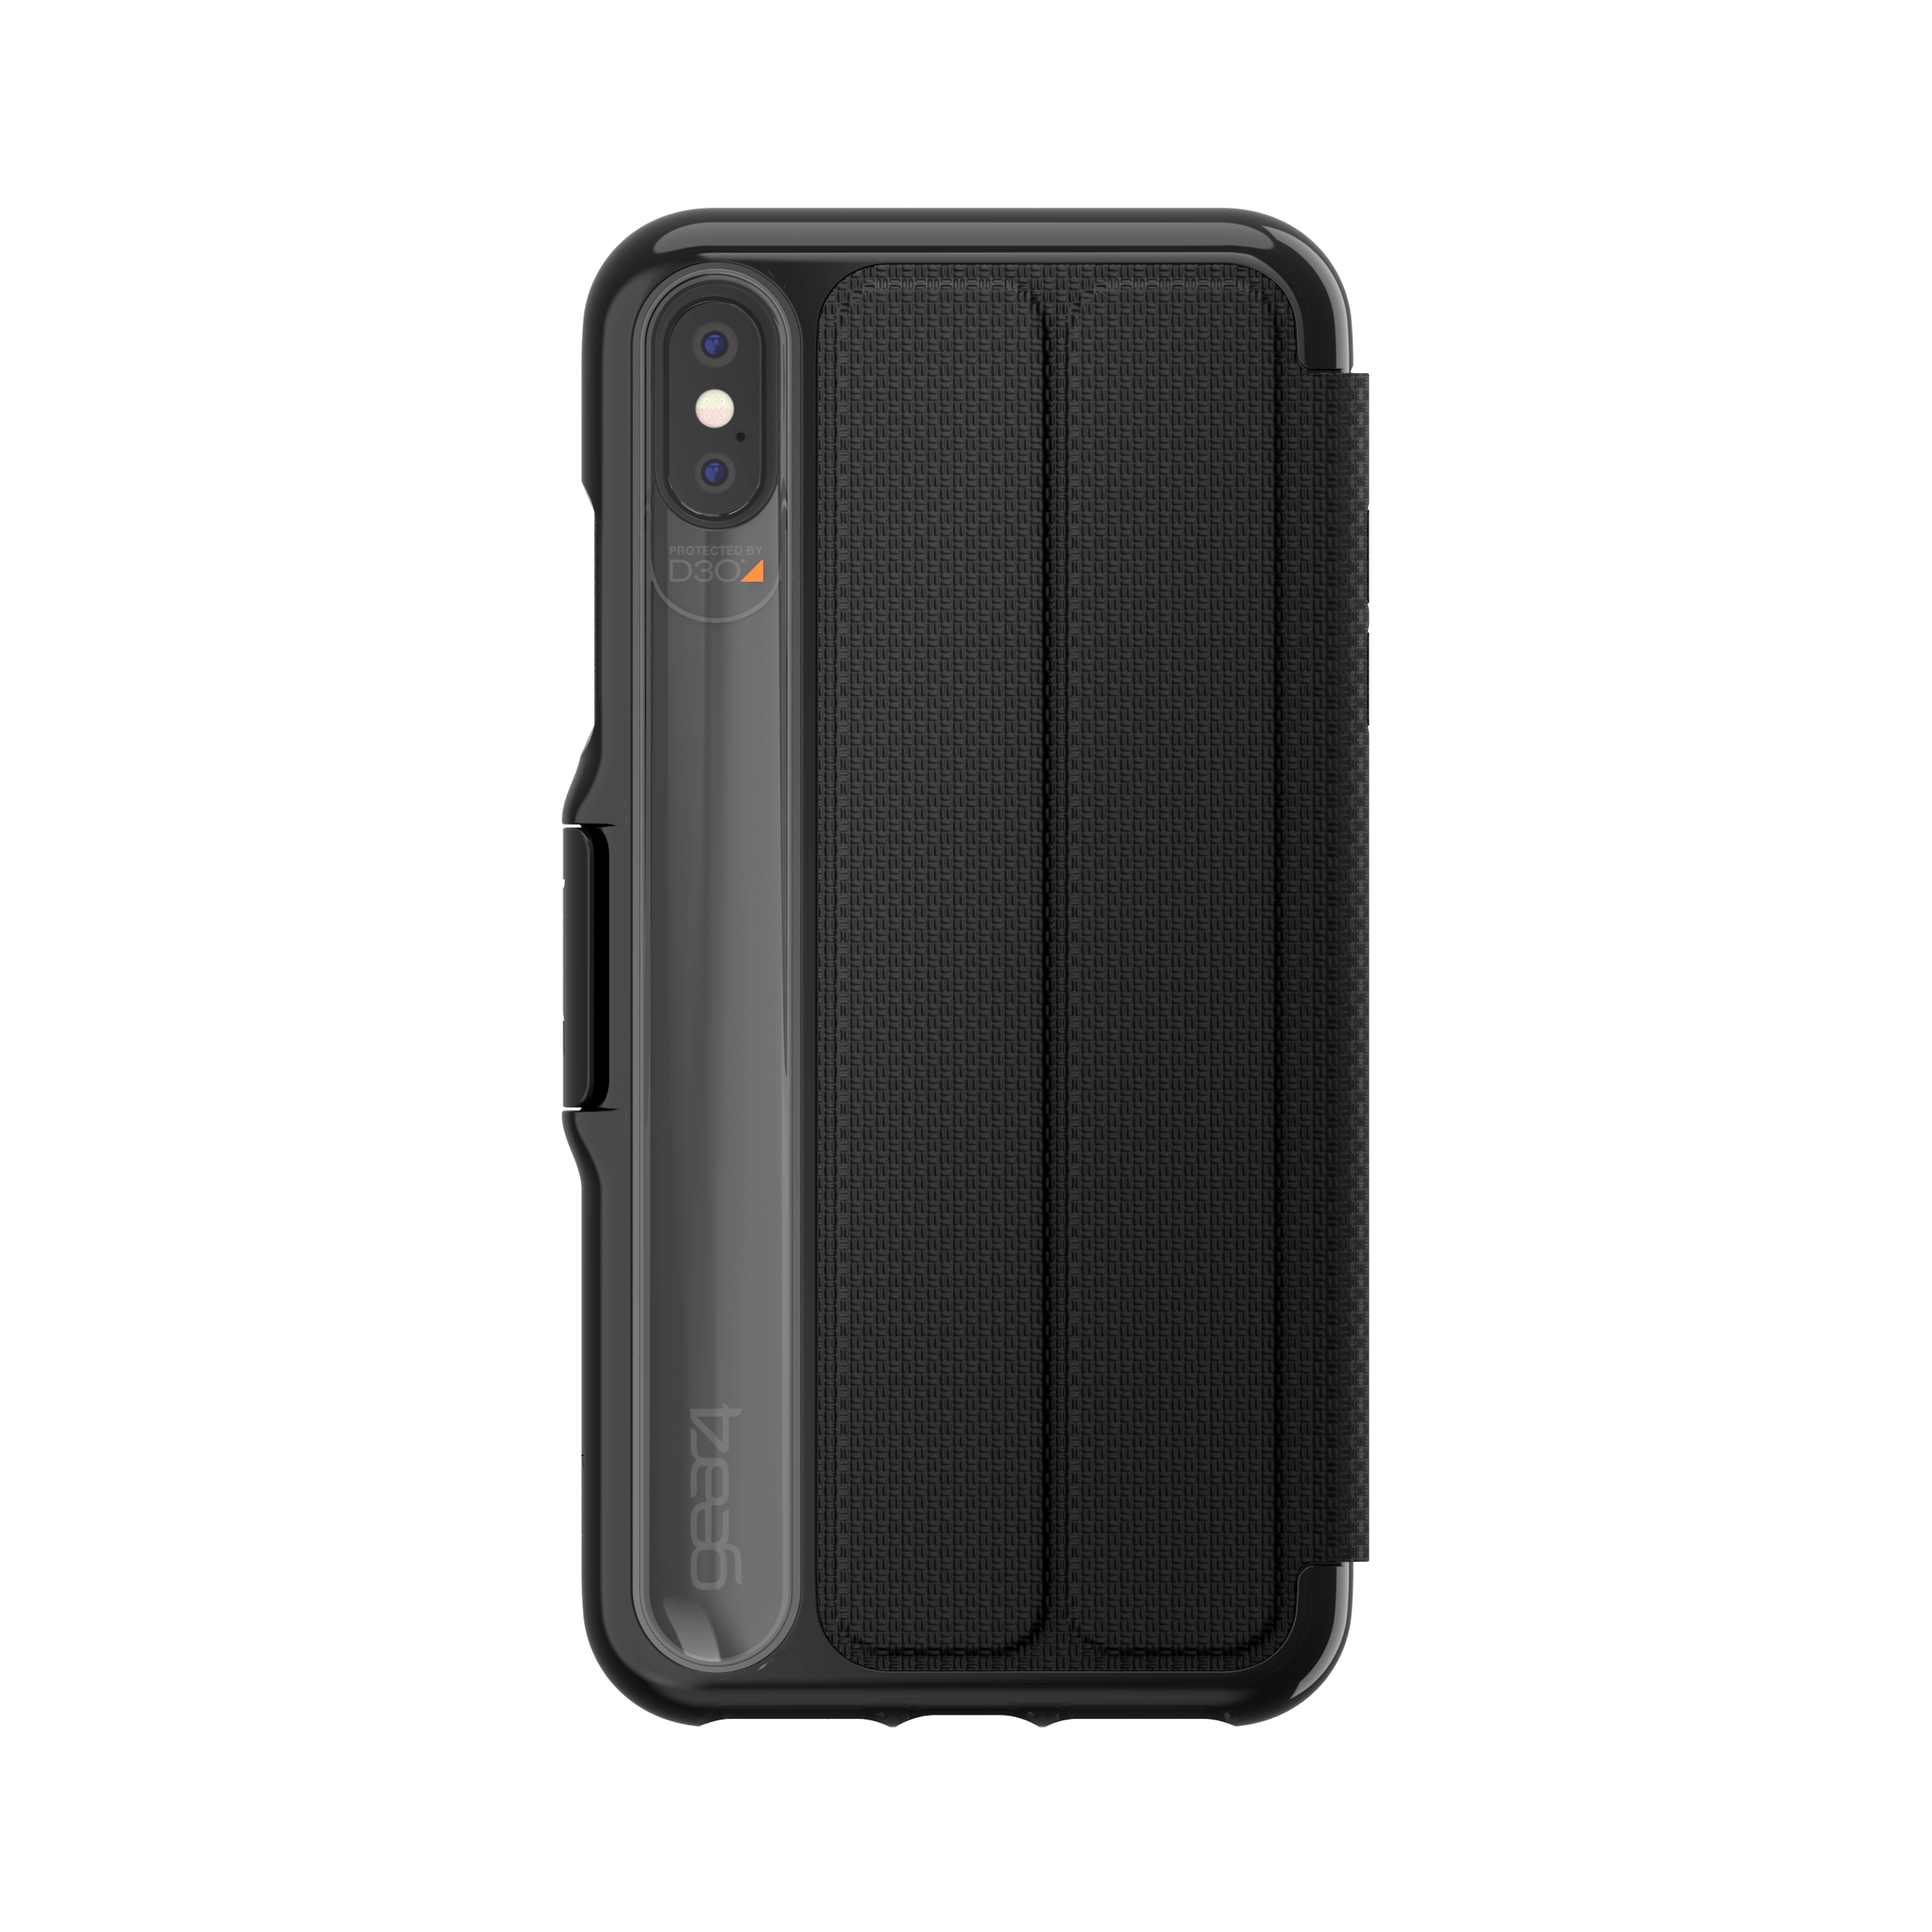 Backcover, MAX, IPHONE GEAR4 Oxford, XS BLACK APPLE,